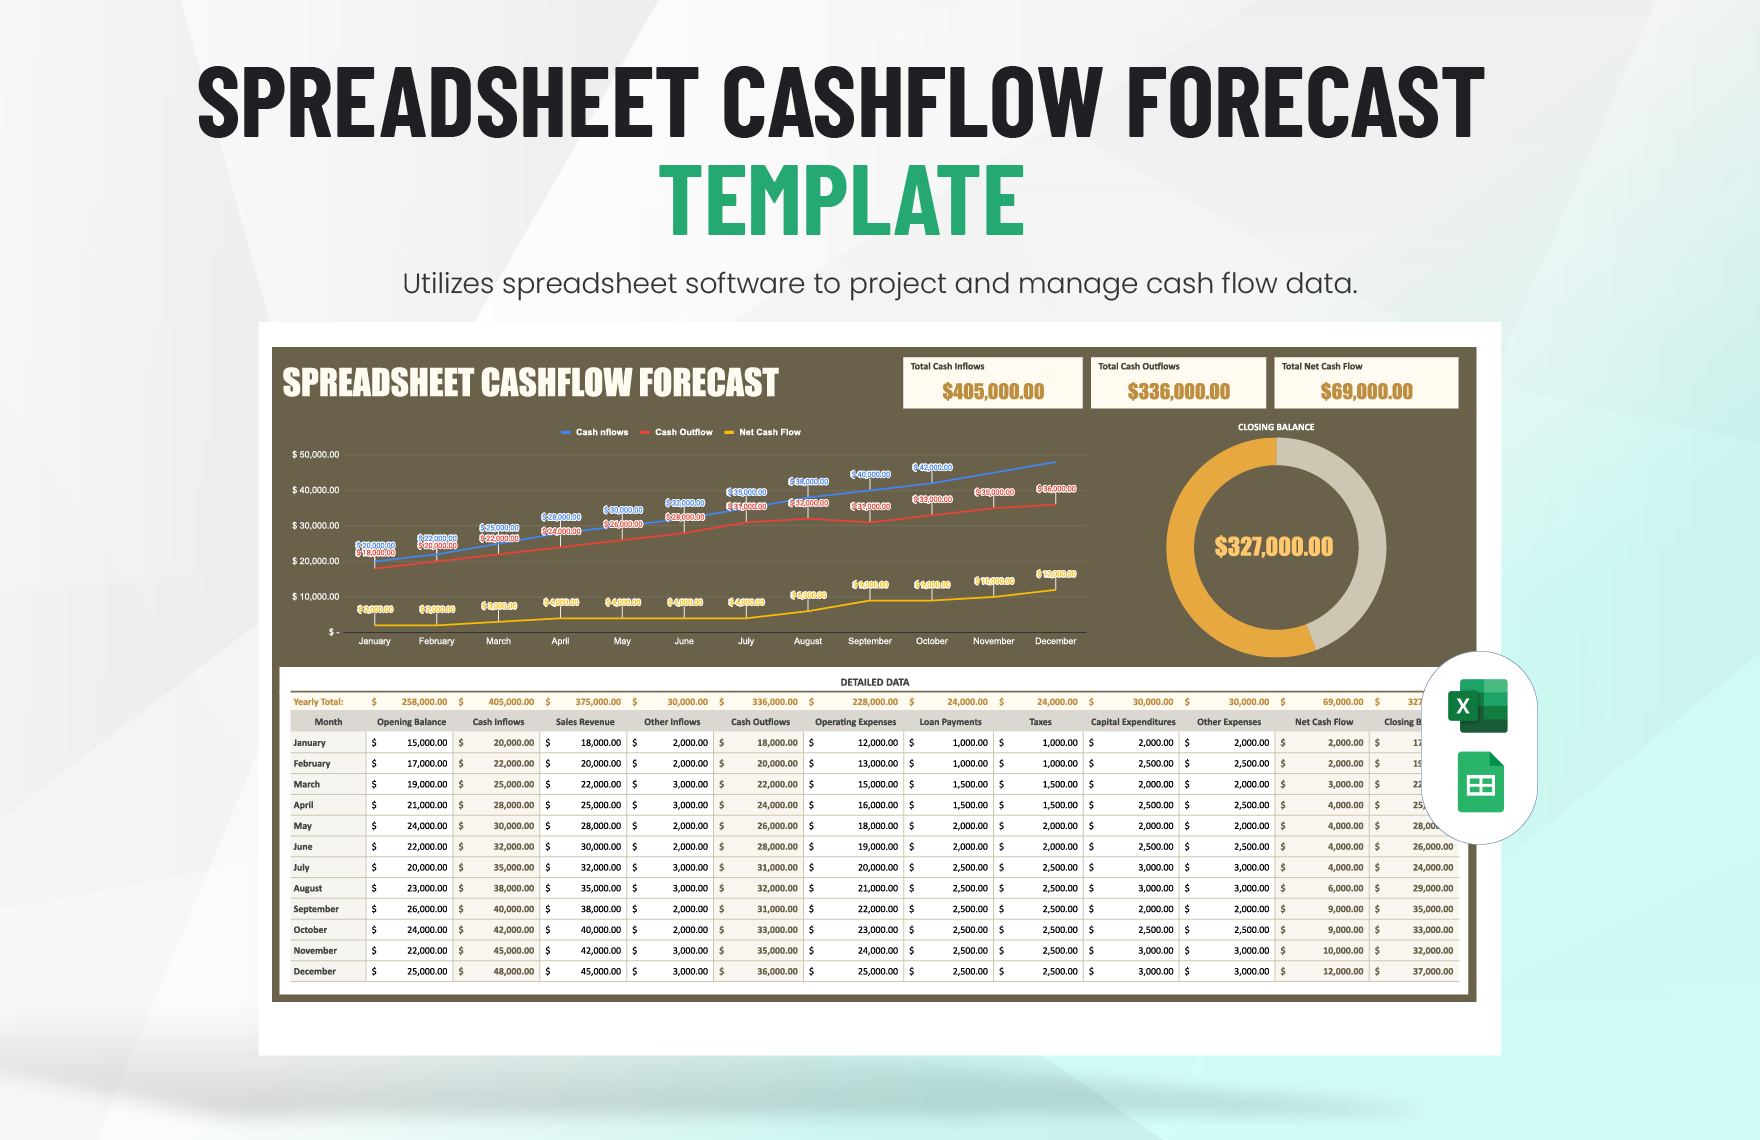 Spreadsheet Cashflow Forecast Template in Excel, Google Sheets